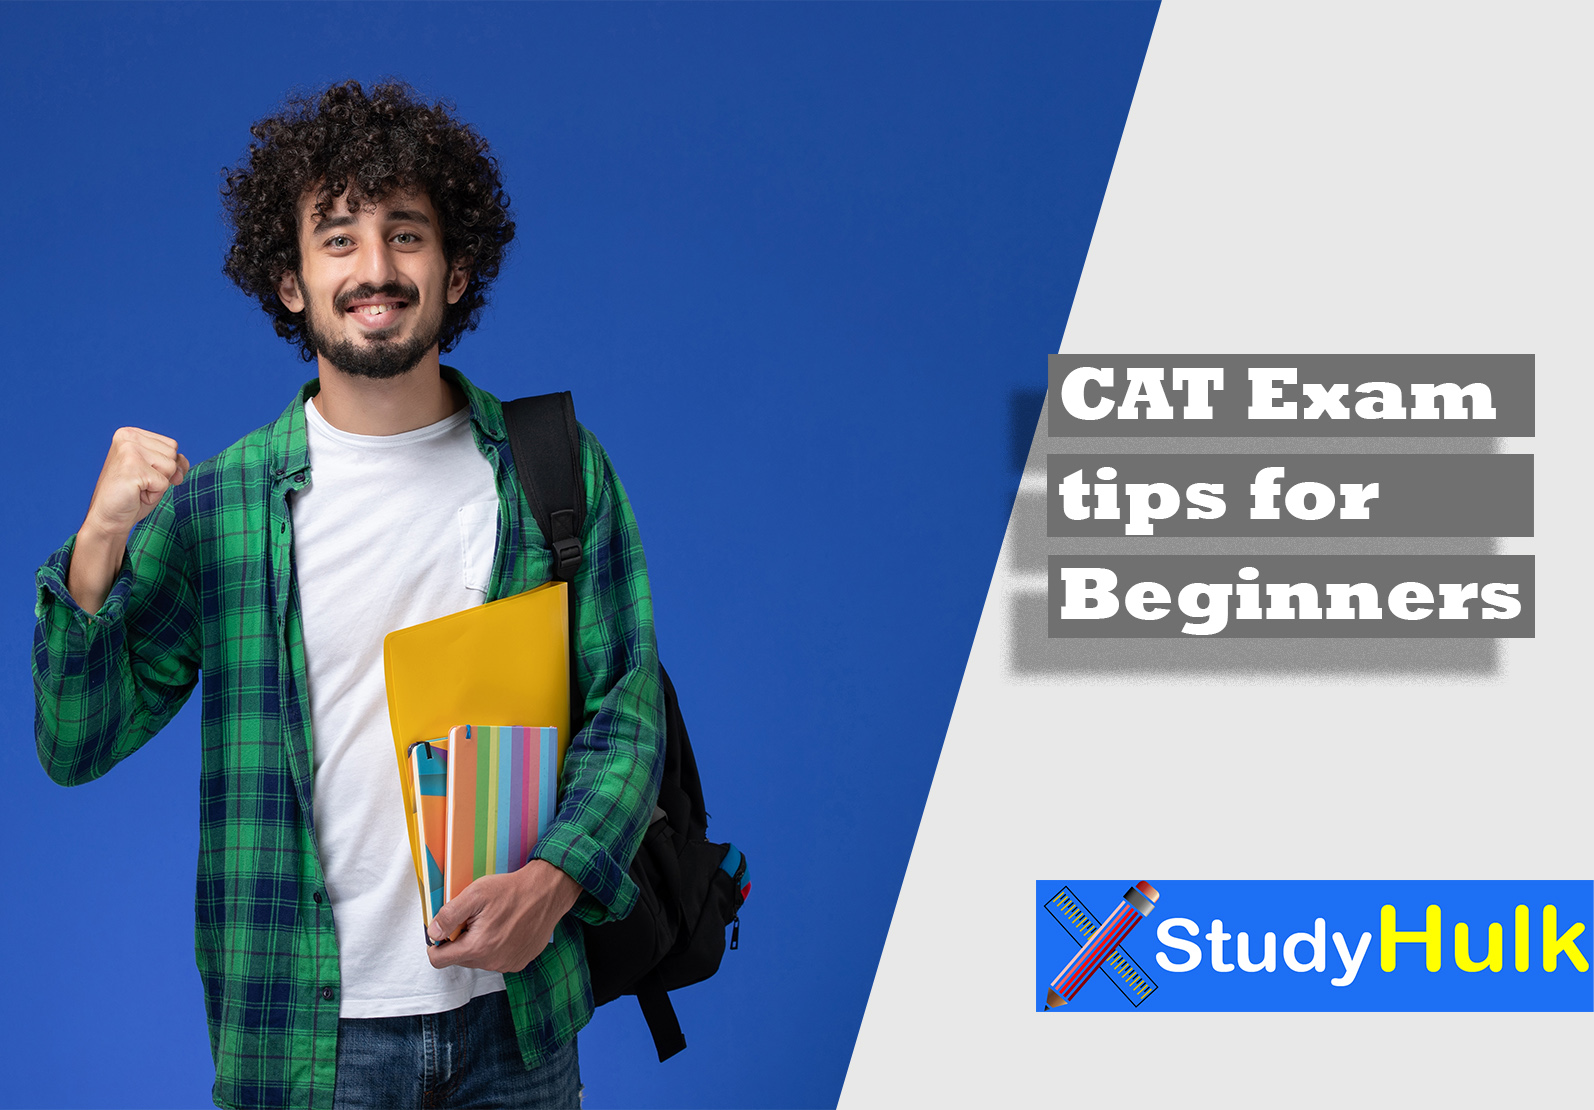 blog post for CAT 2021 EXAMS TIPS FOR BEGINNERS